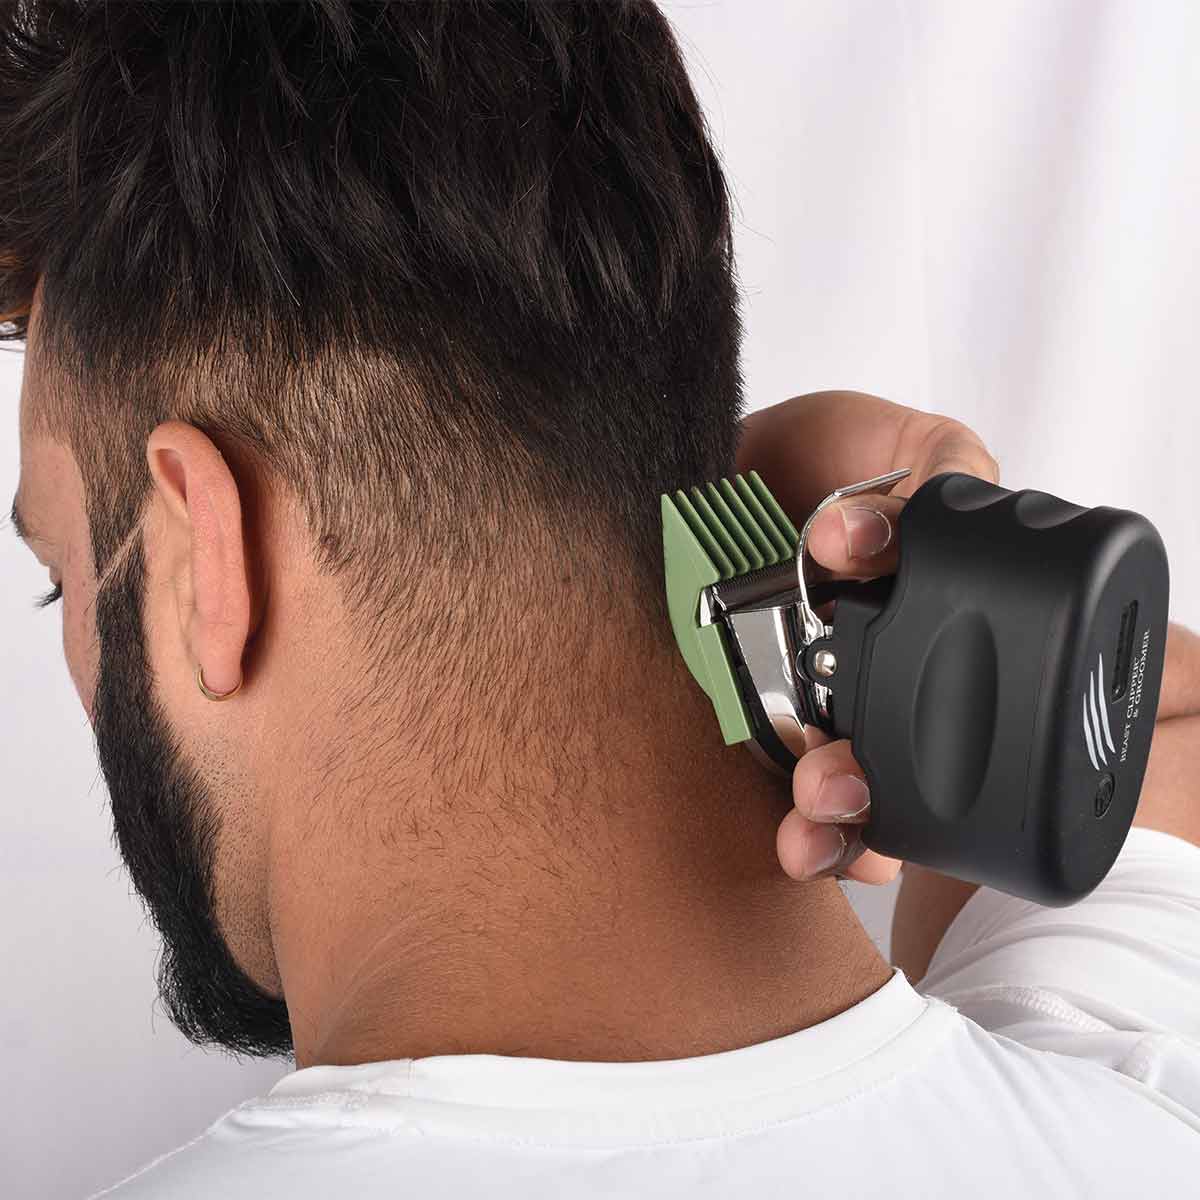 the patented design lets you grip the beast clipper between your fingers. thos grip makes it easy to trim the hair on the back of your head